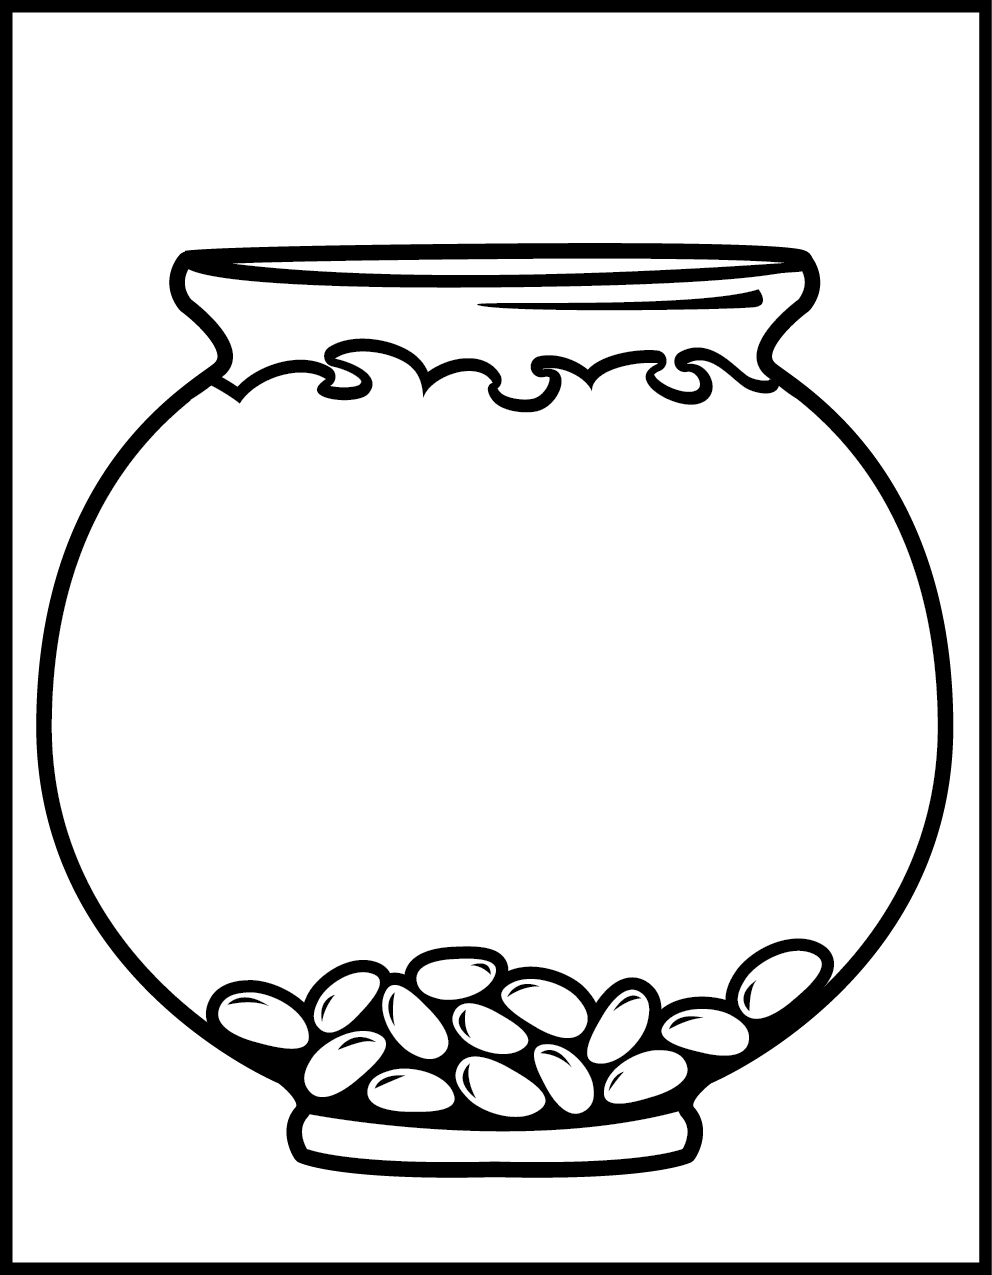 Bowl Coloring Page - ClipArt Best